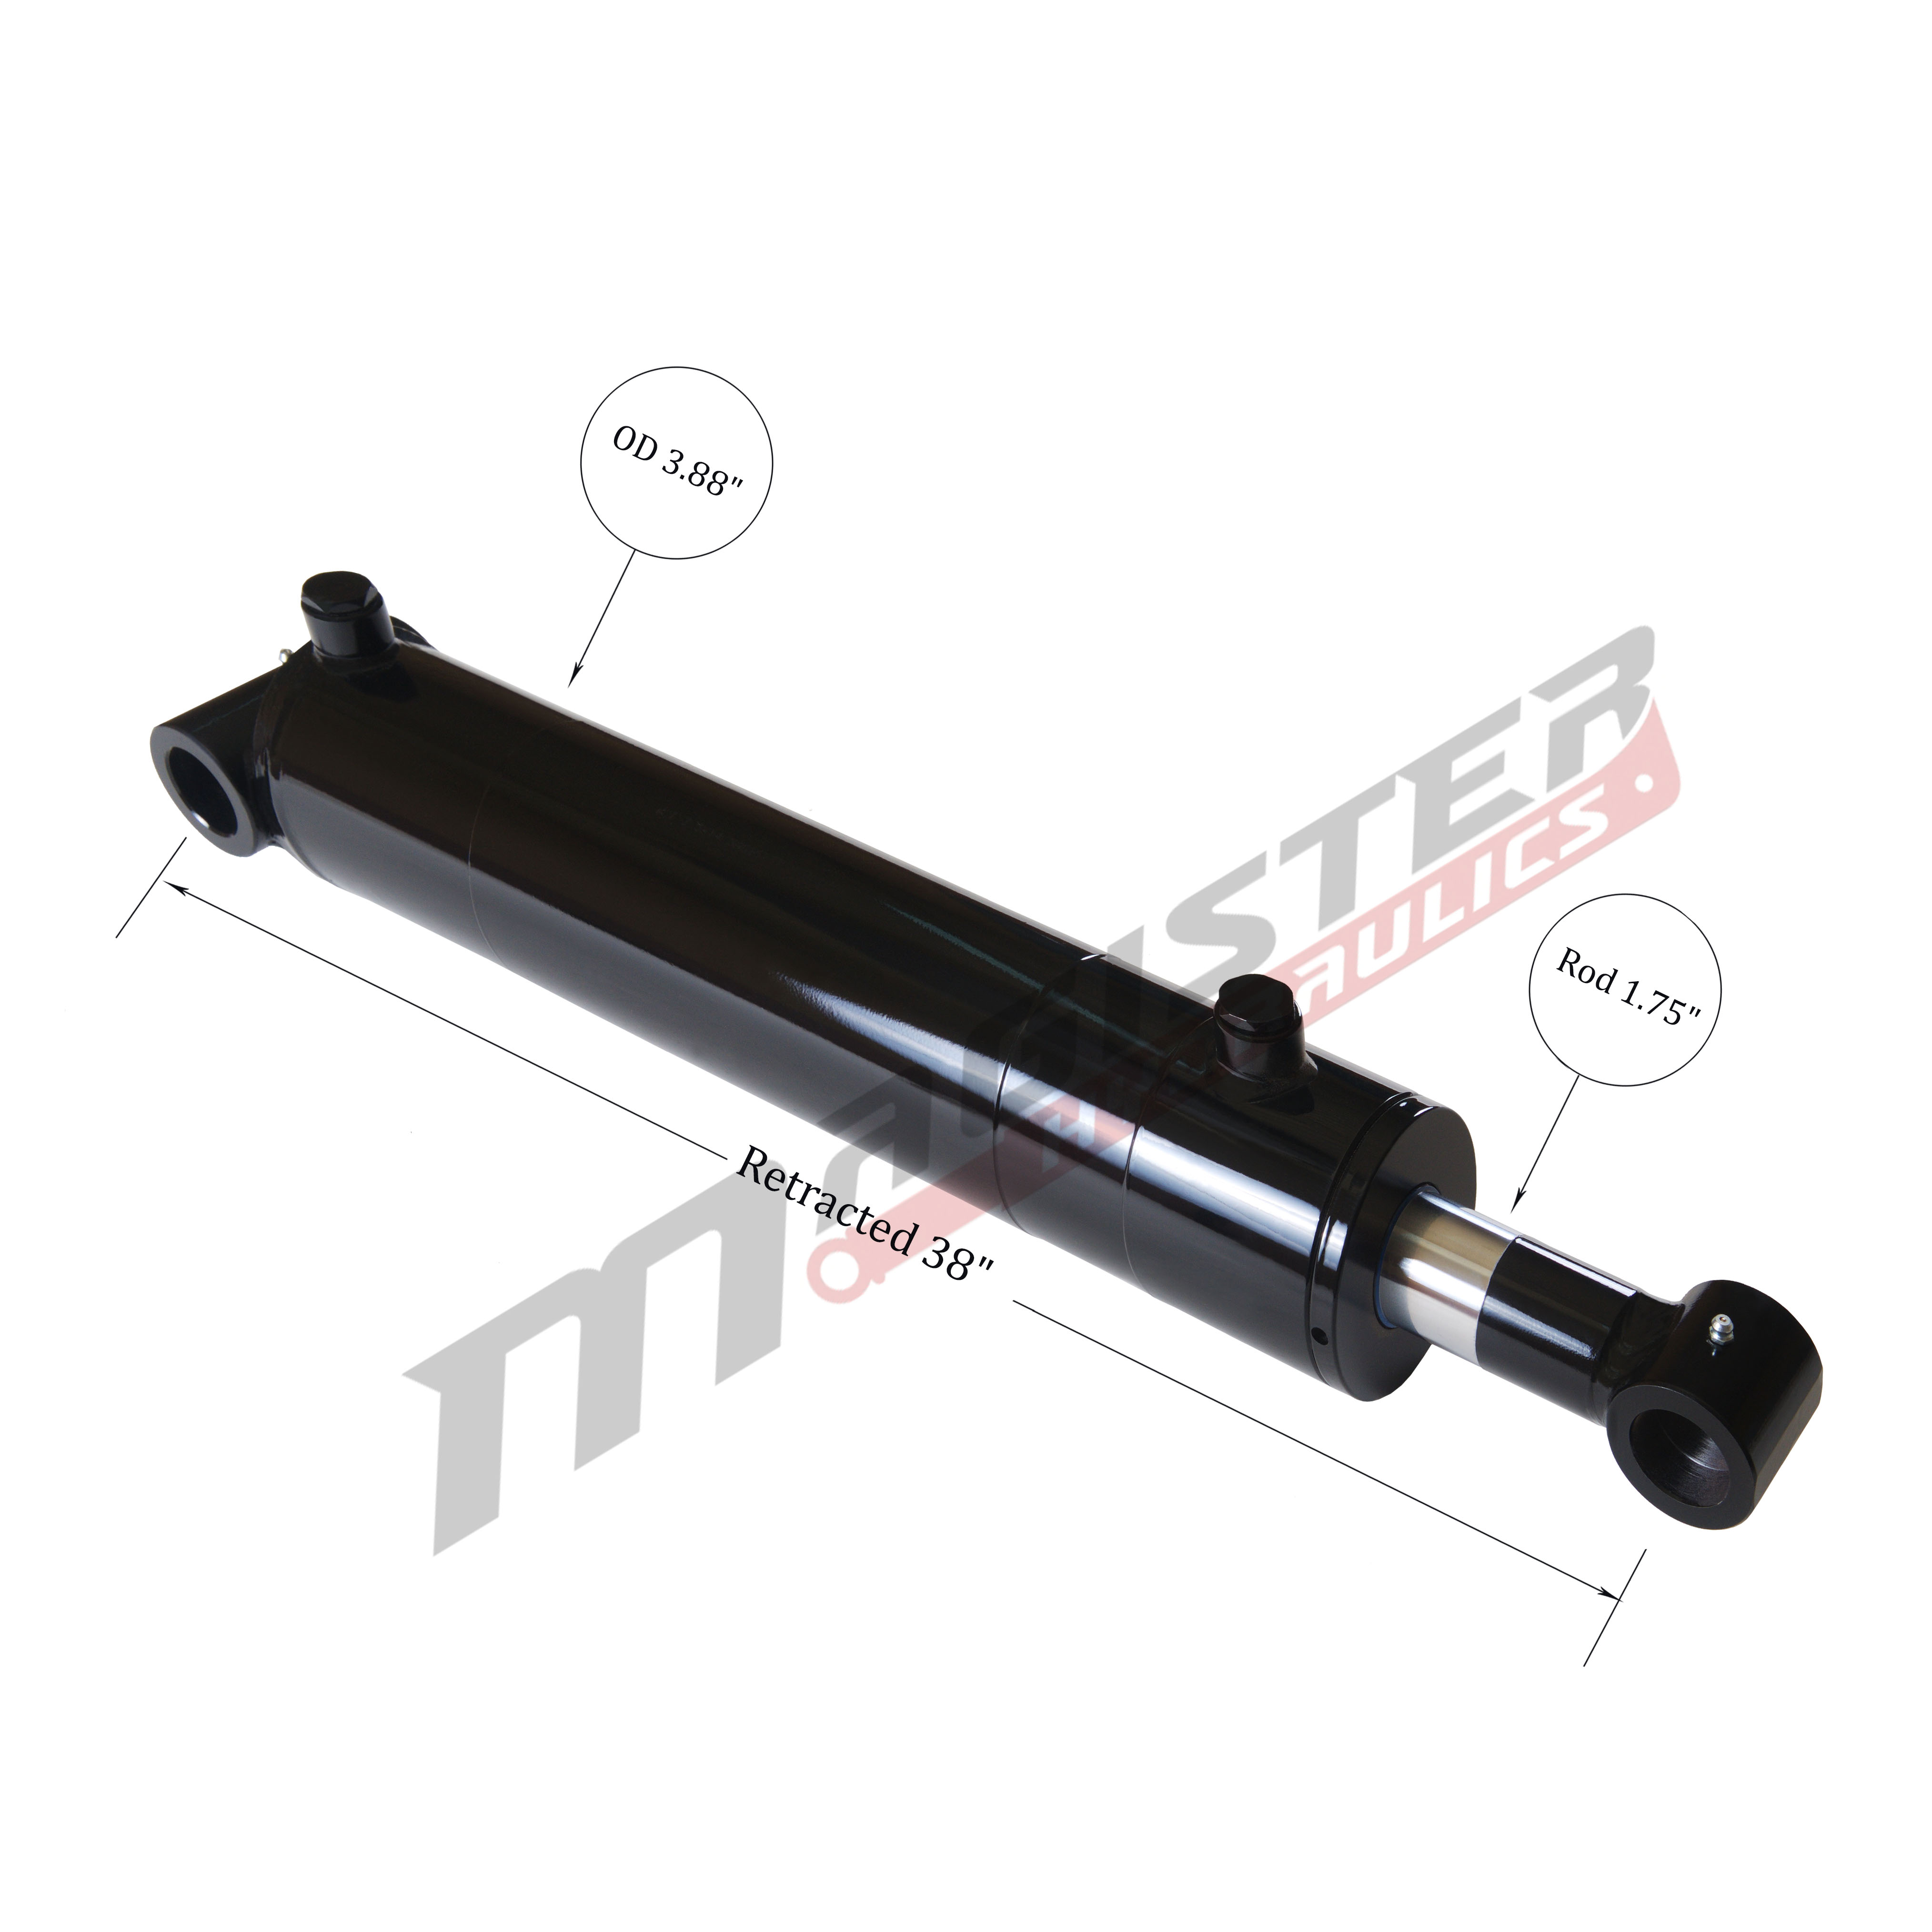 3.5 bore x 28 stroke hydraulic cylinder, welded cross tube double acting cylinder | Magister Hydraulics